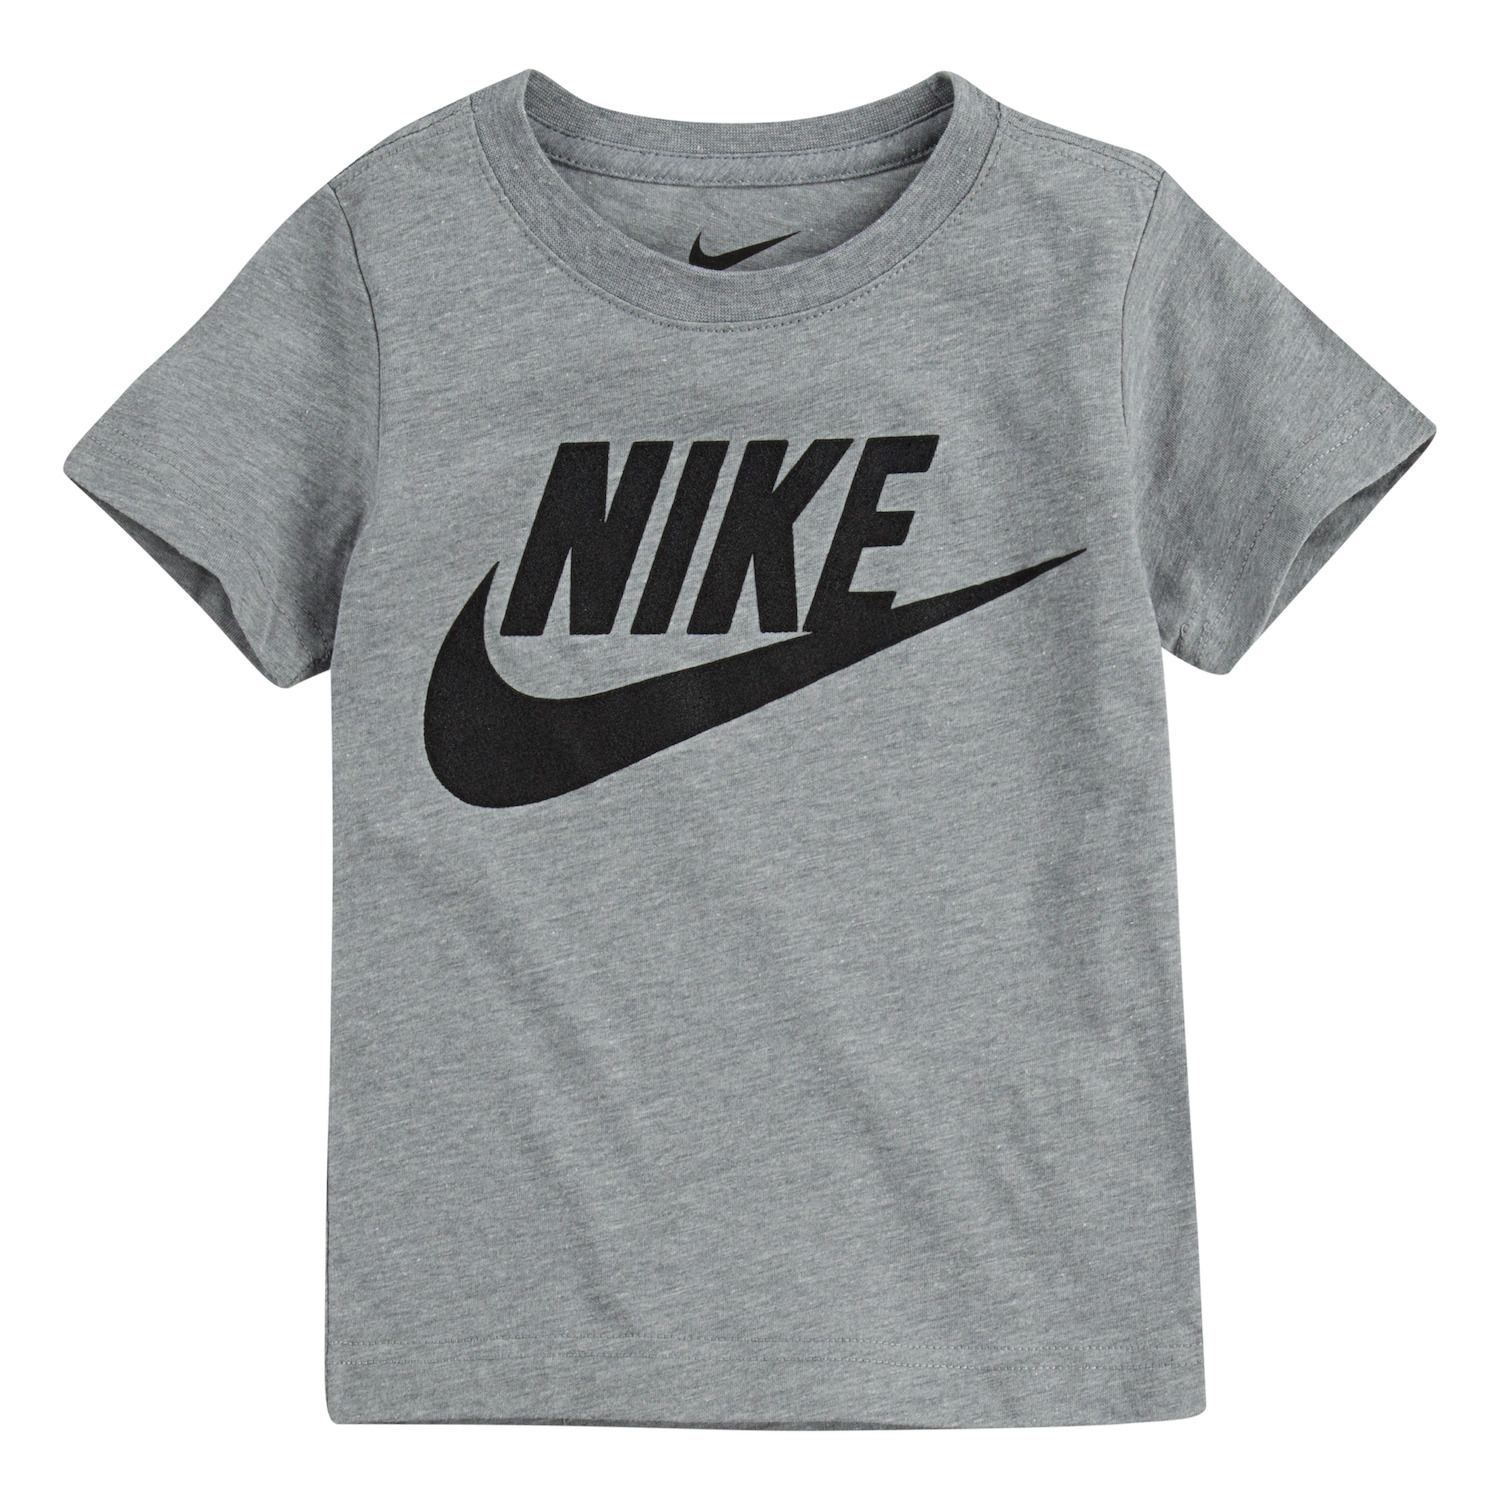 nike outfit for toddler boy